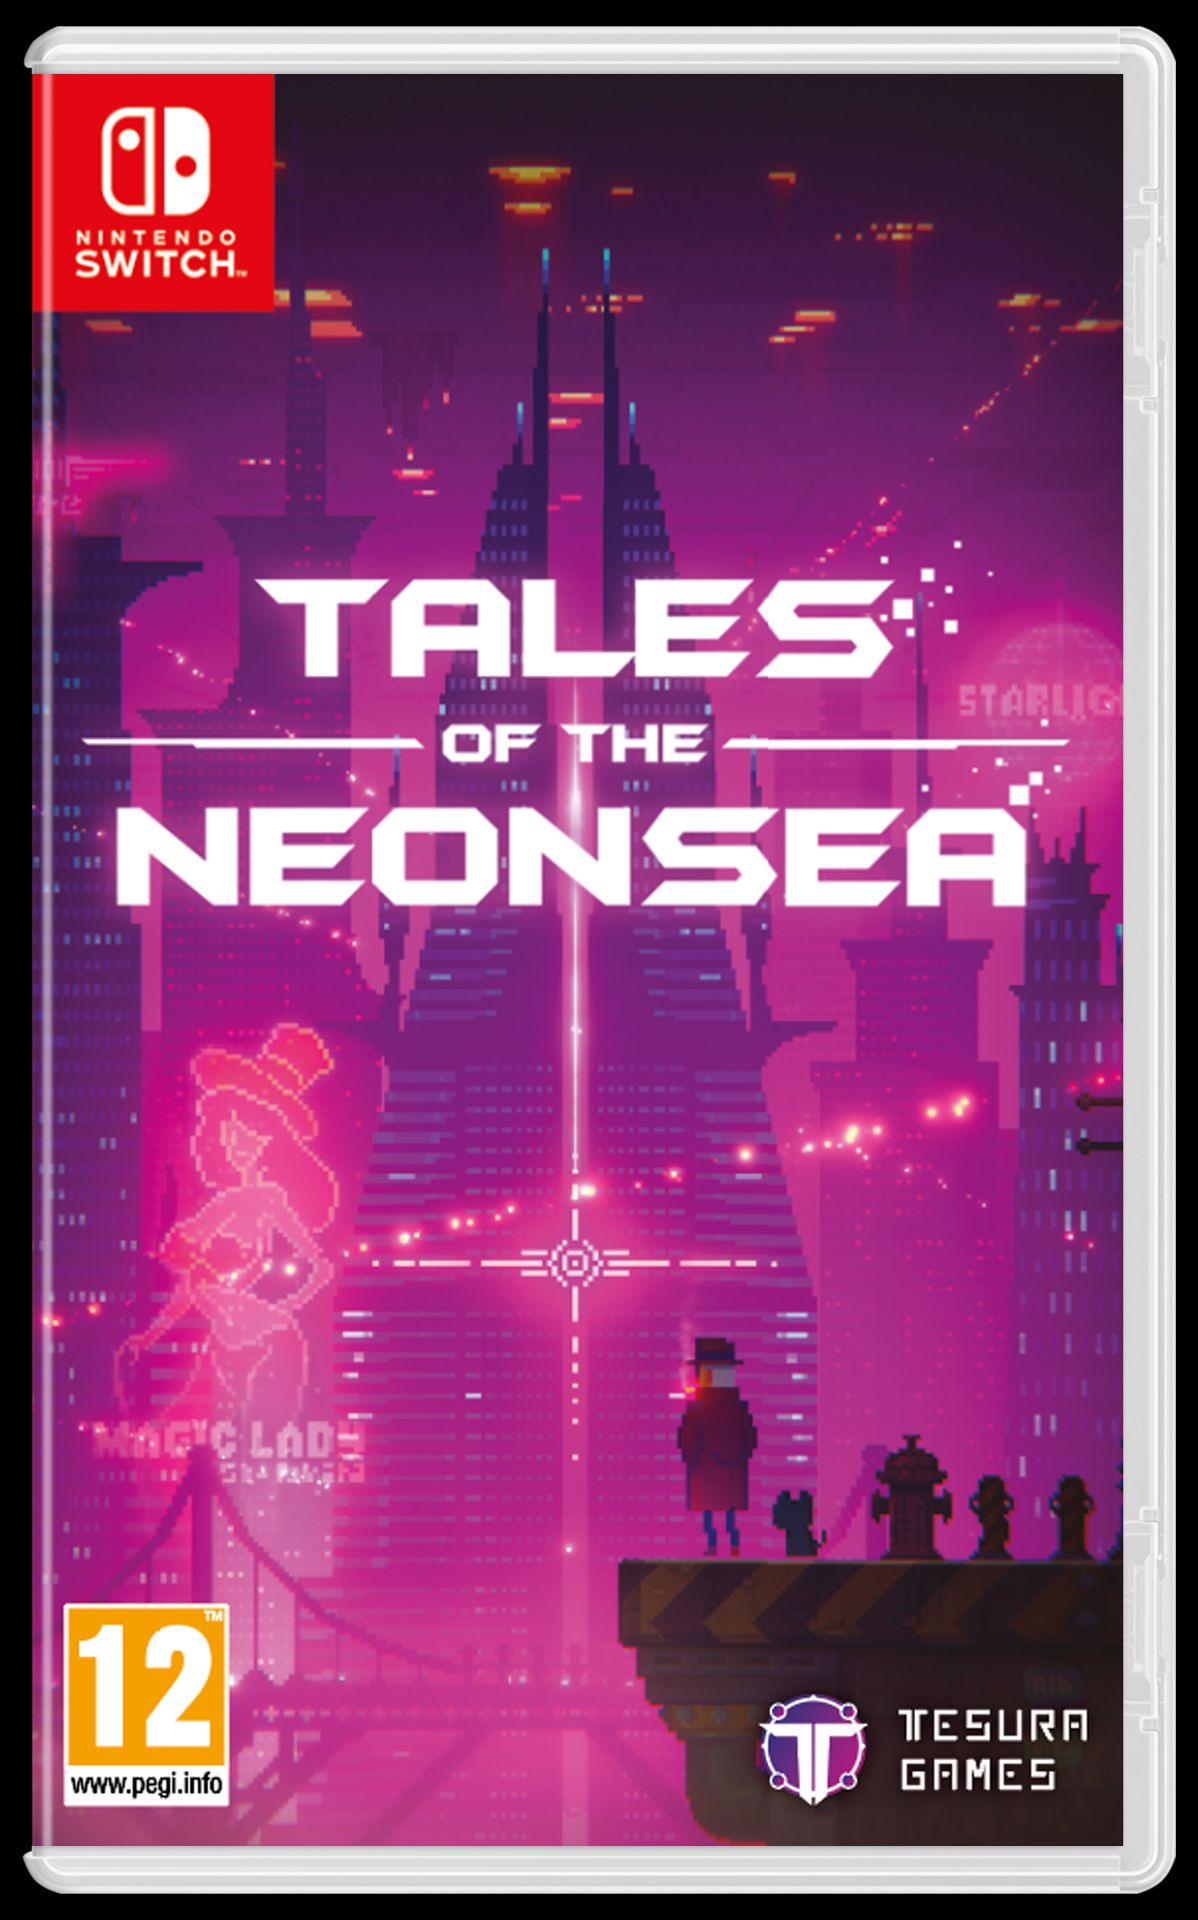 TALES OF THE NEON SEA